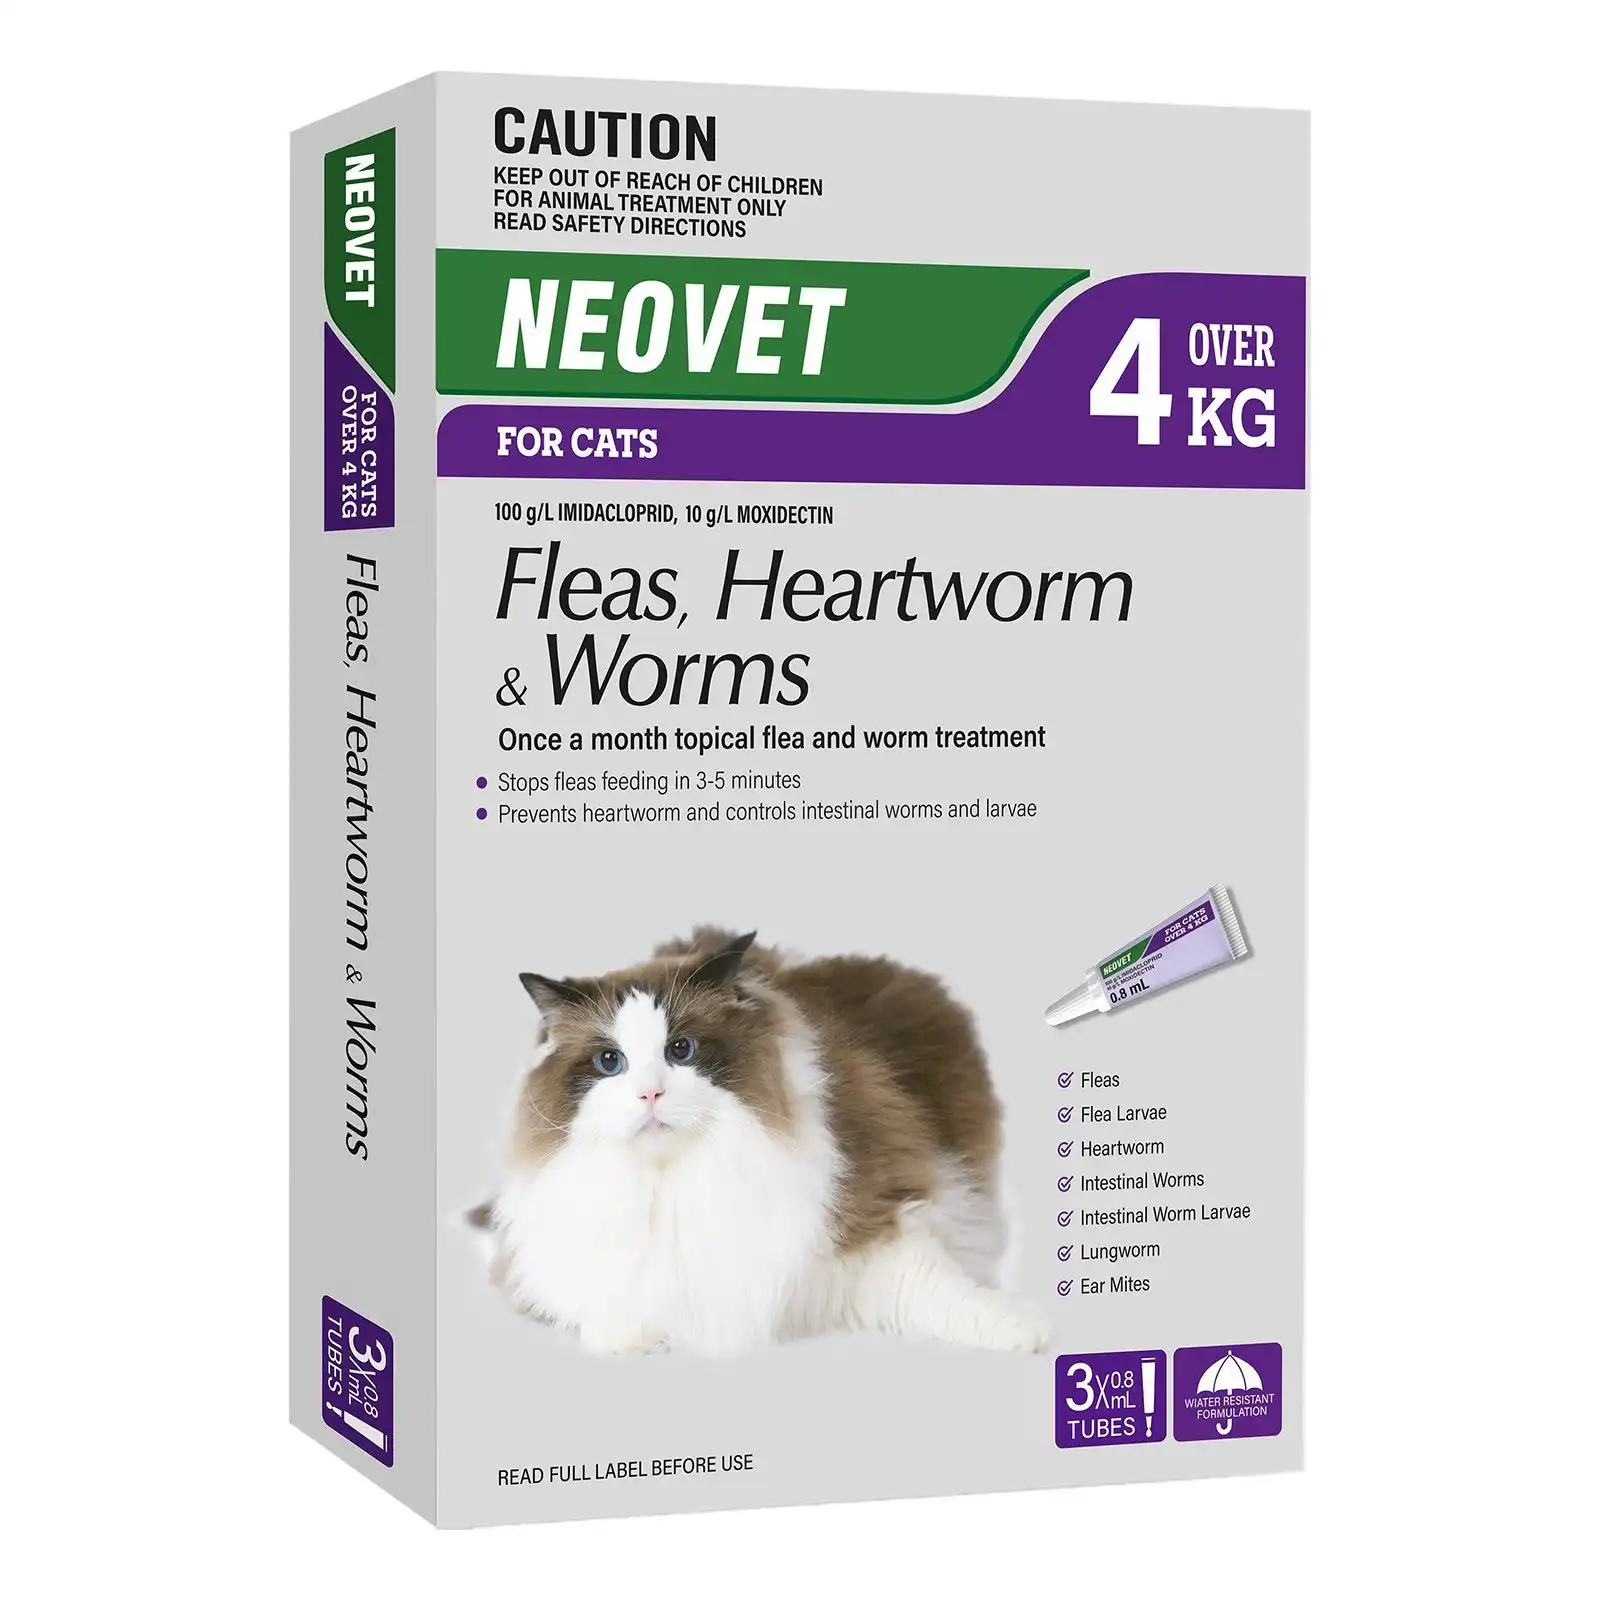 Neovet - Generic Advocate for Cats Over 4 Kg (PURPLE) 3 Pack